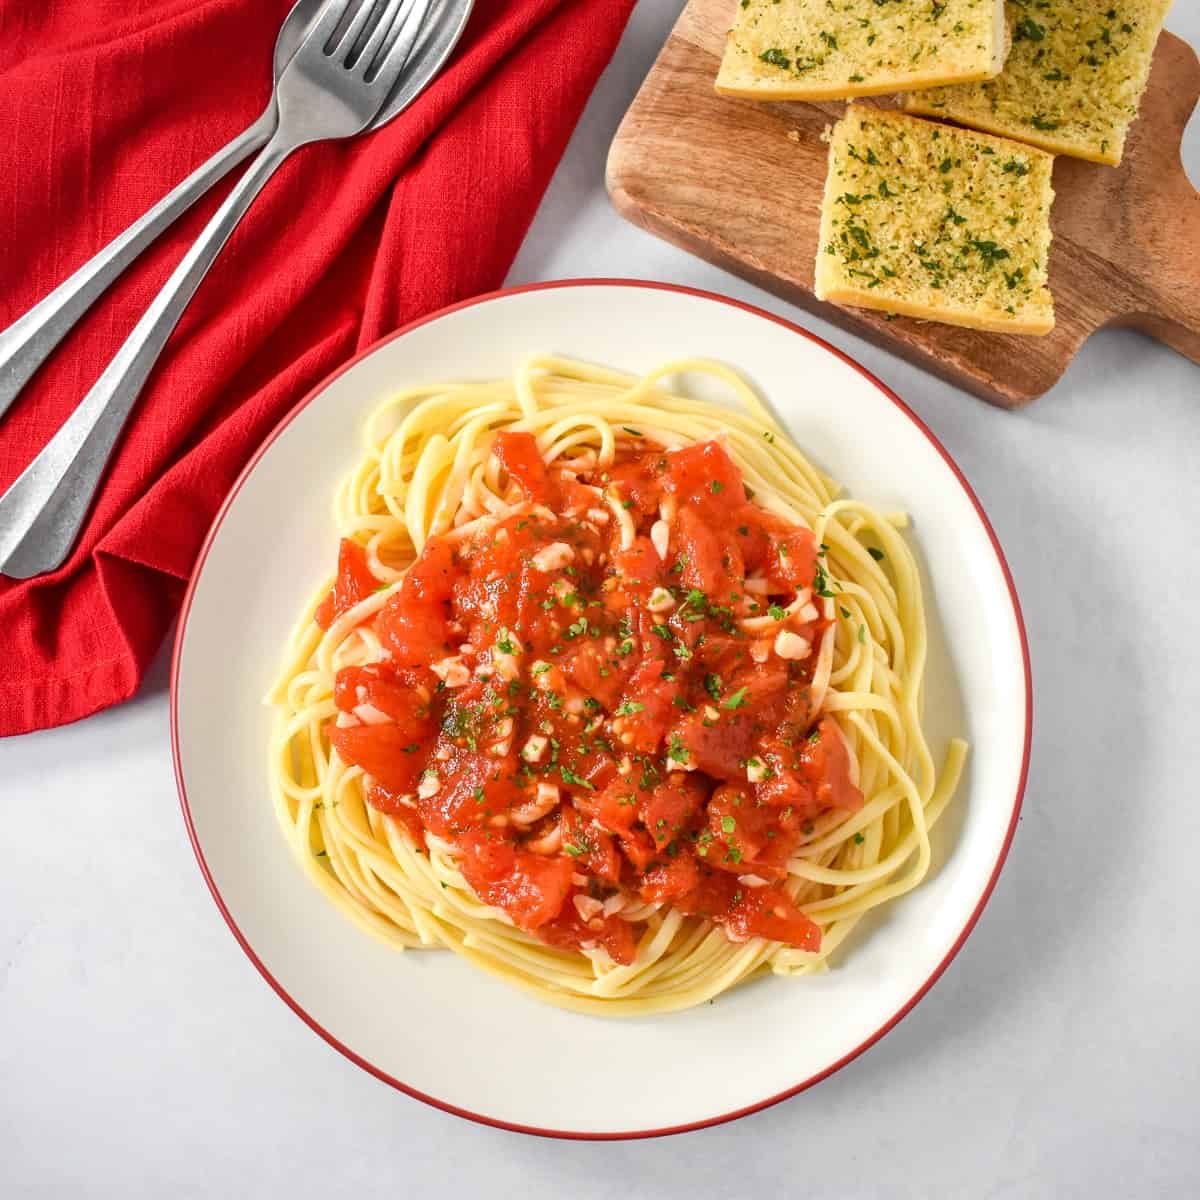 The fresh tomato pasta served on a white plate with a red rim, with a red linen and silver to the left and garlic bread to the top right side.